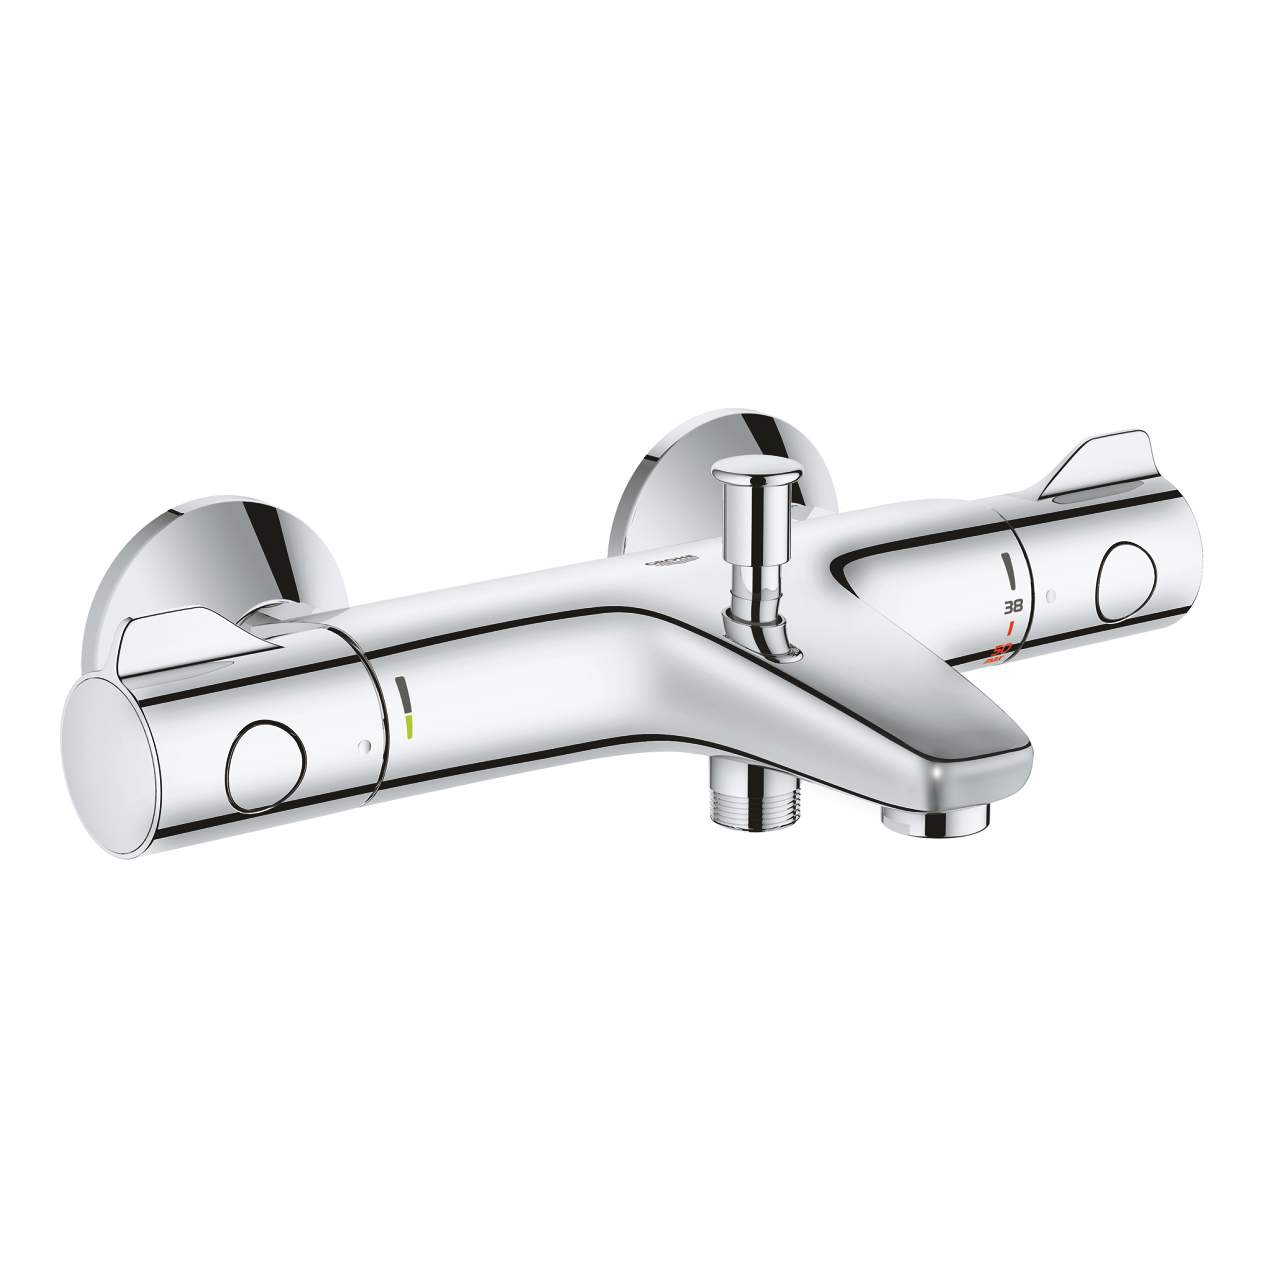 Thermostatic bath and shower mixer, Grohtherm G800